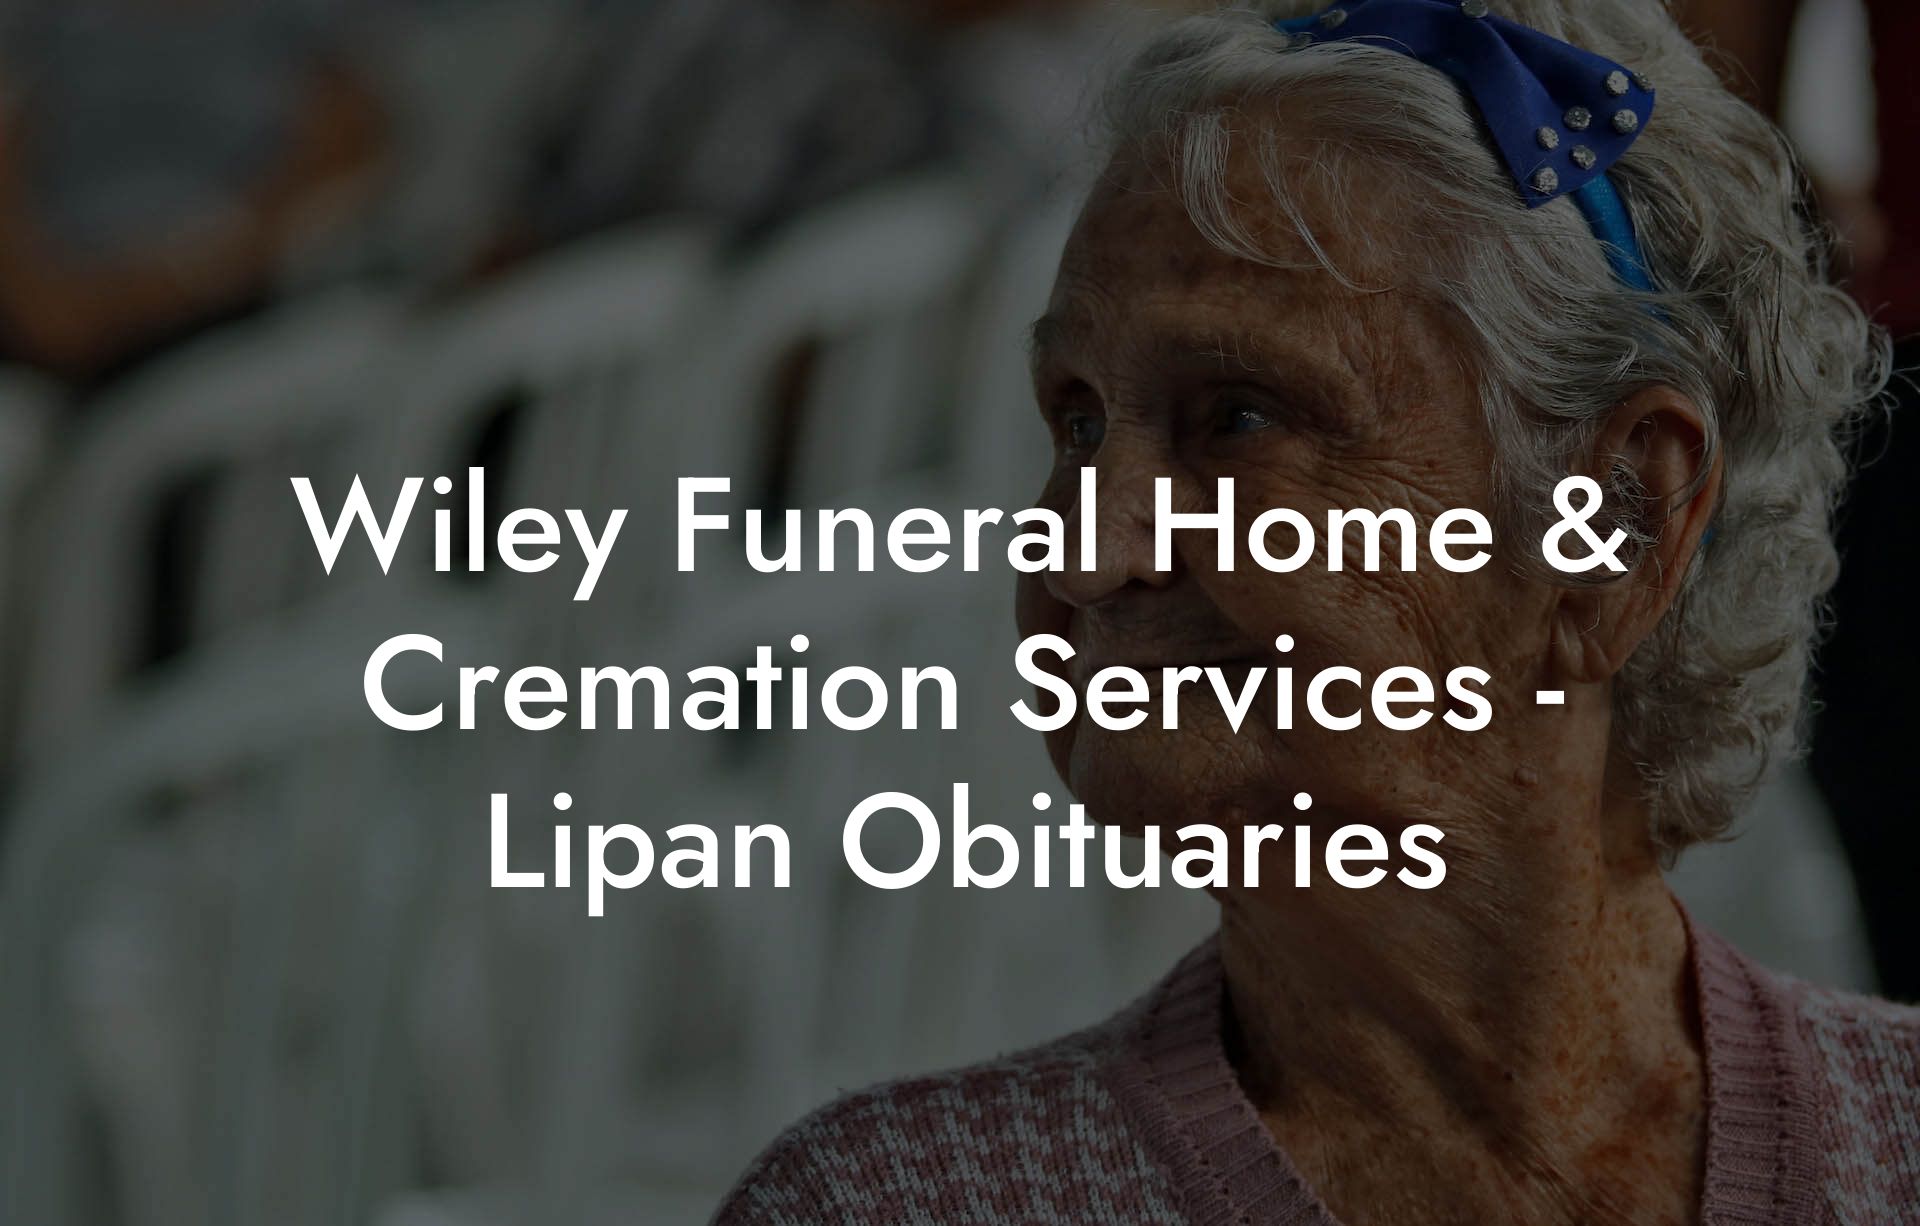 Wiley Funeral Home & Cremation Services - Lipan Obituaries